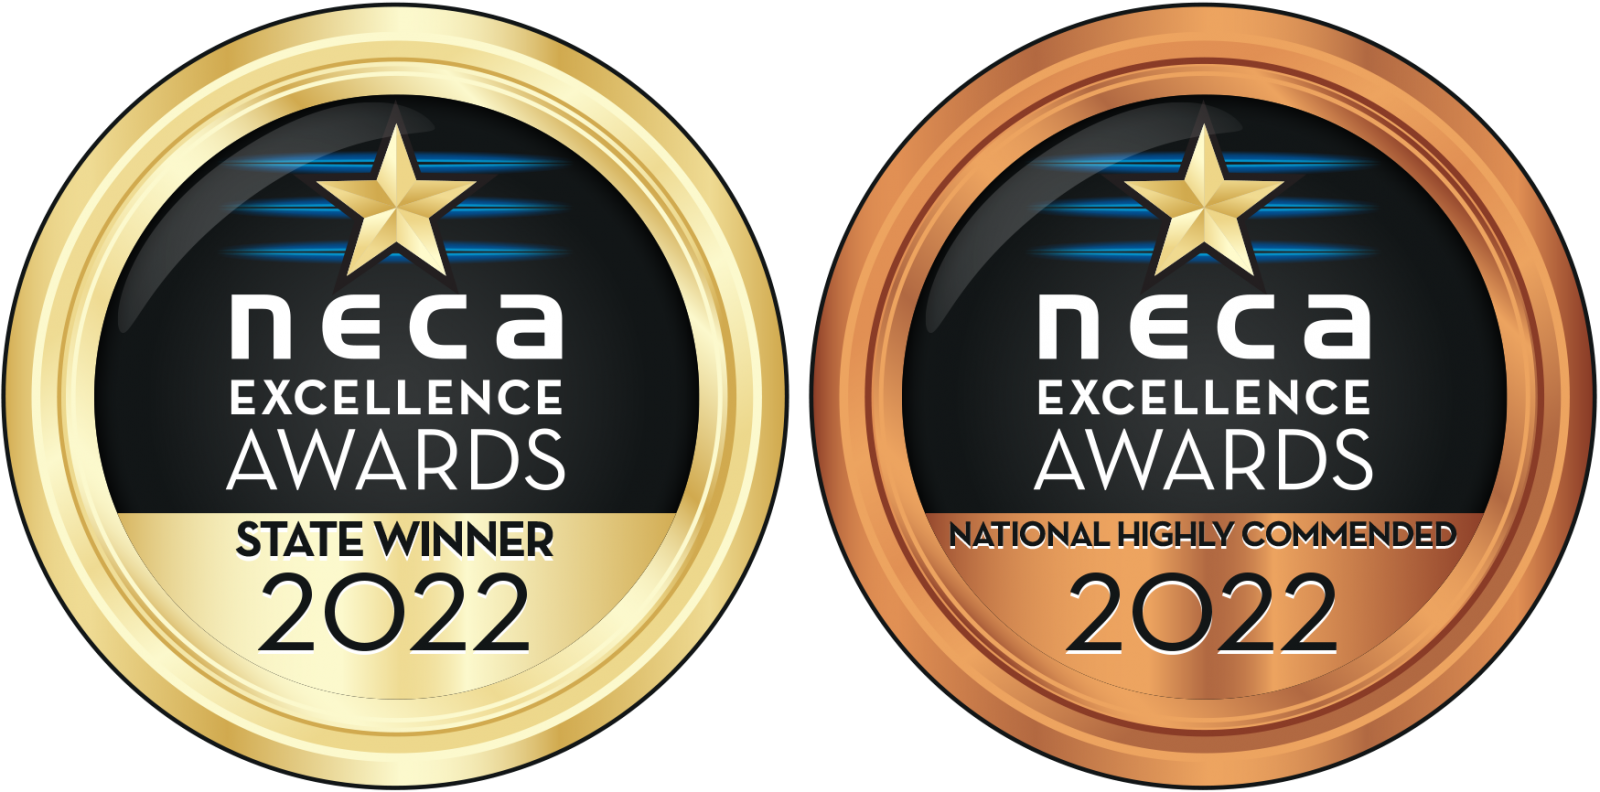 2022 NECA SA/NT Excellence Awards Winner & National Awards High Commendation assets/images/projects/neca_2022_combined_medallions.png